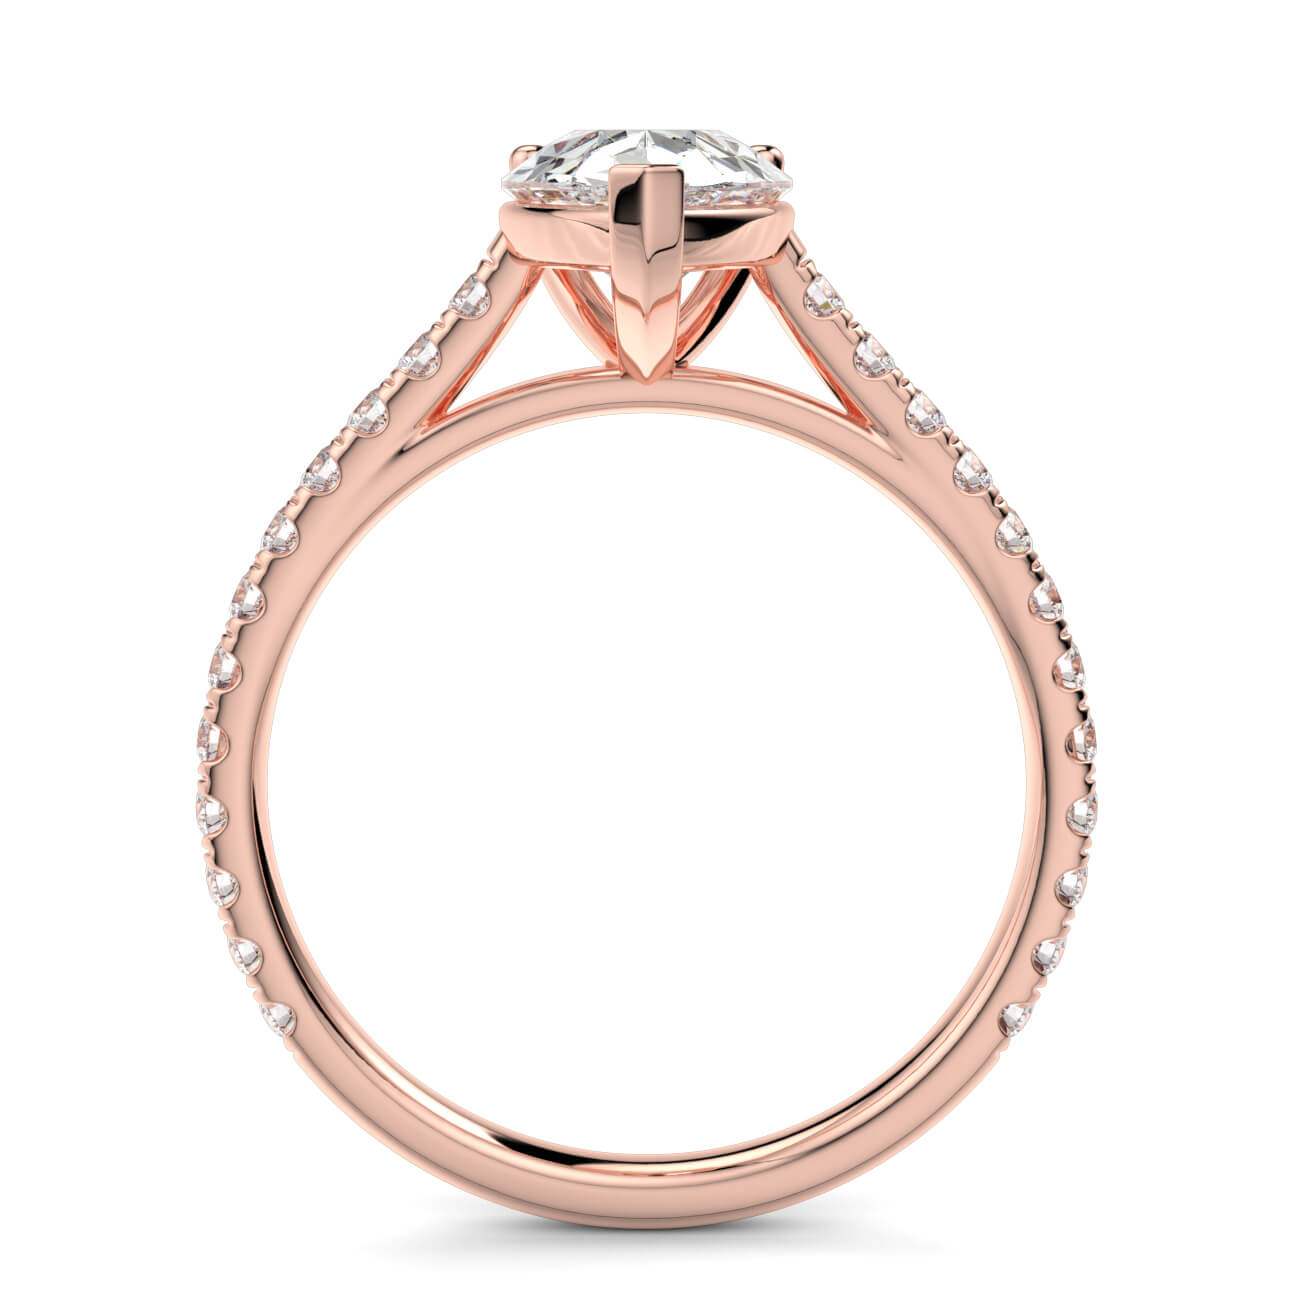 Pear shape diamond cathedral engagement ring in rose gold – Australian Diamond Network